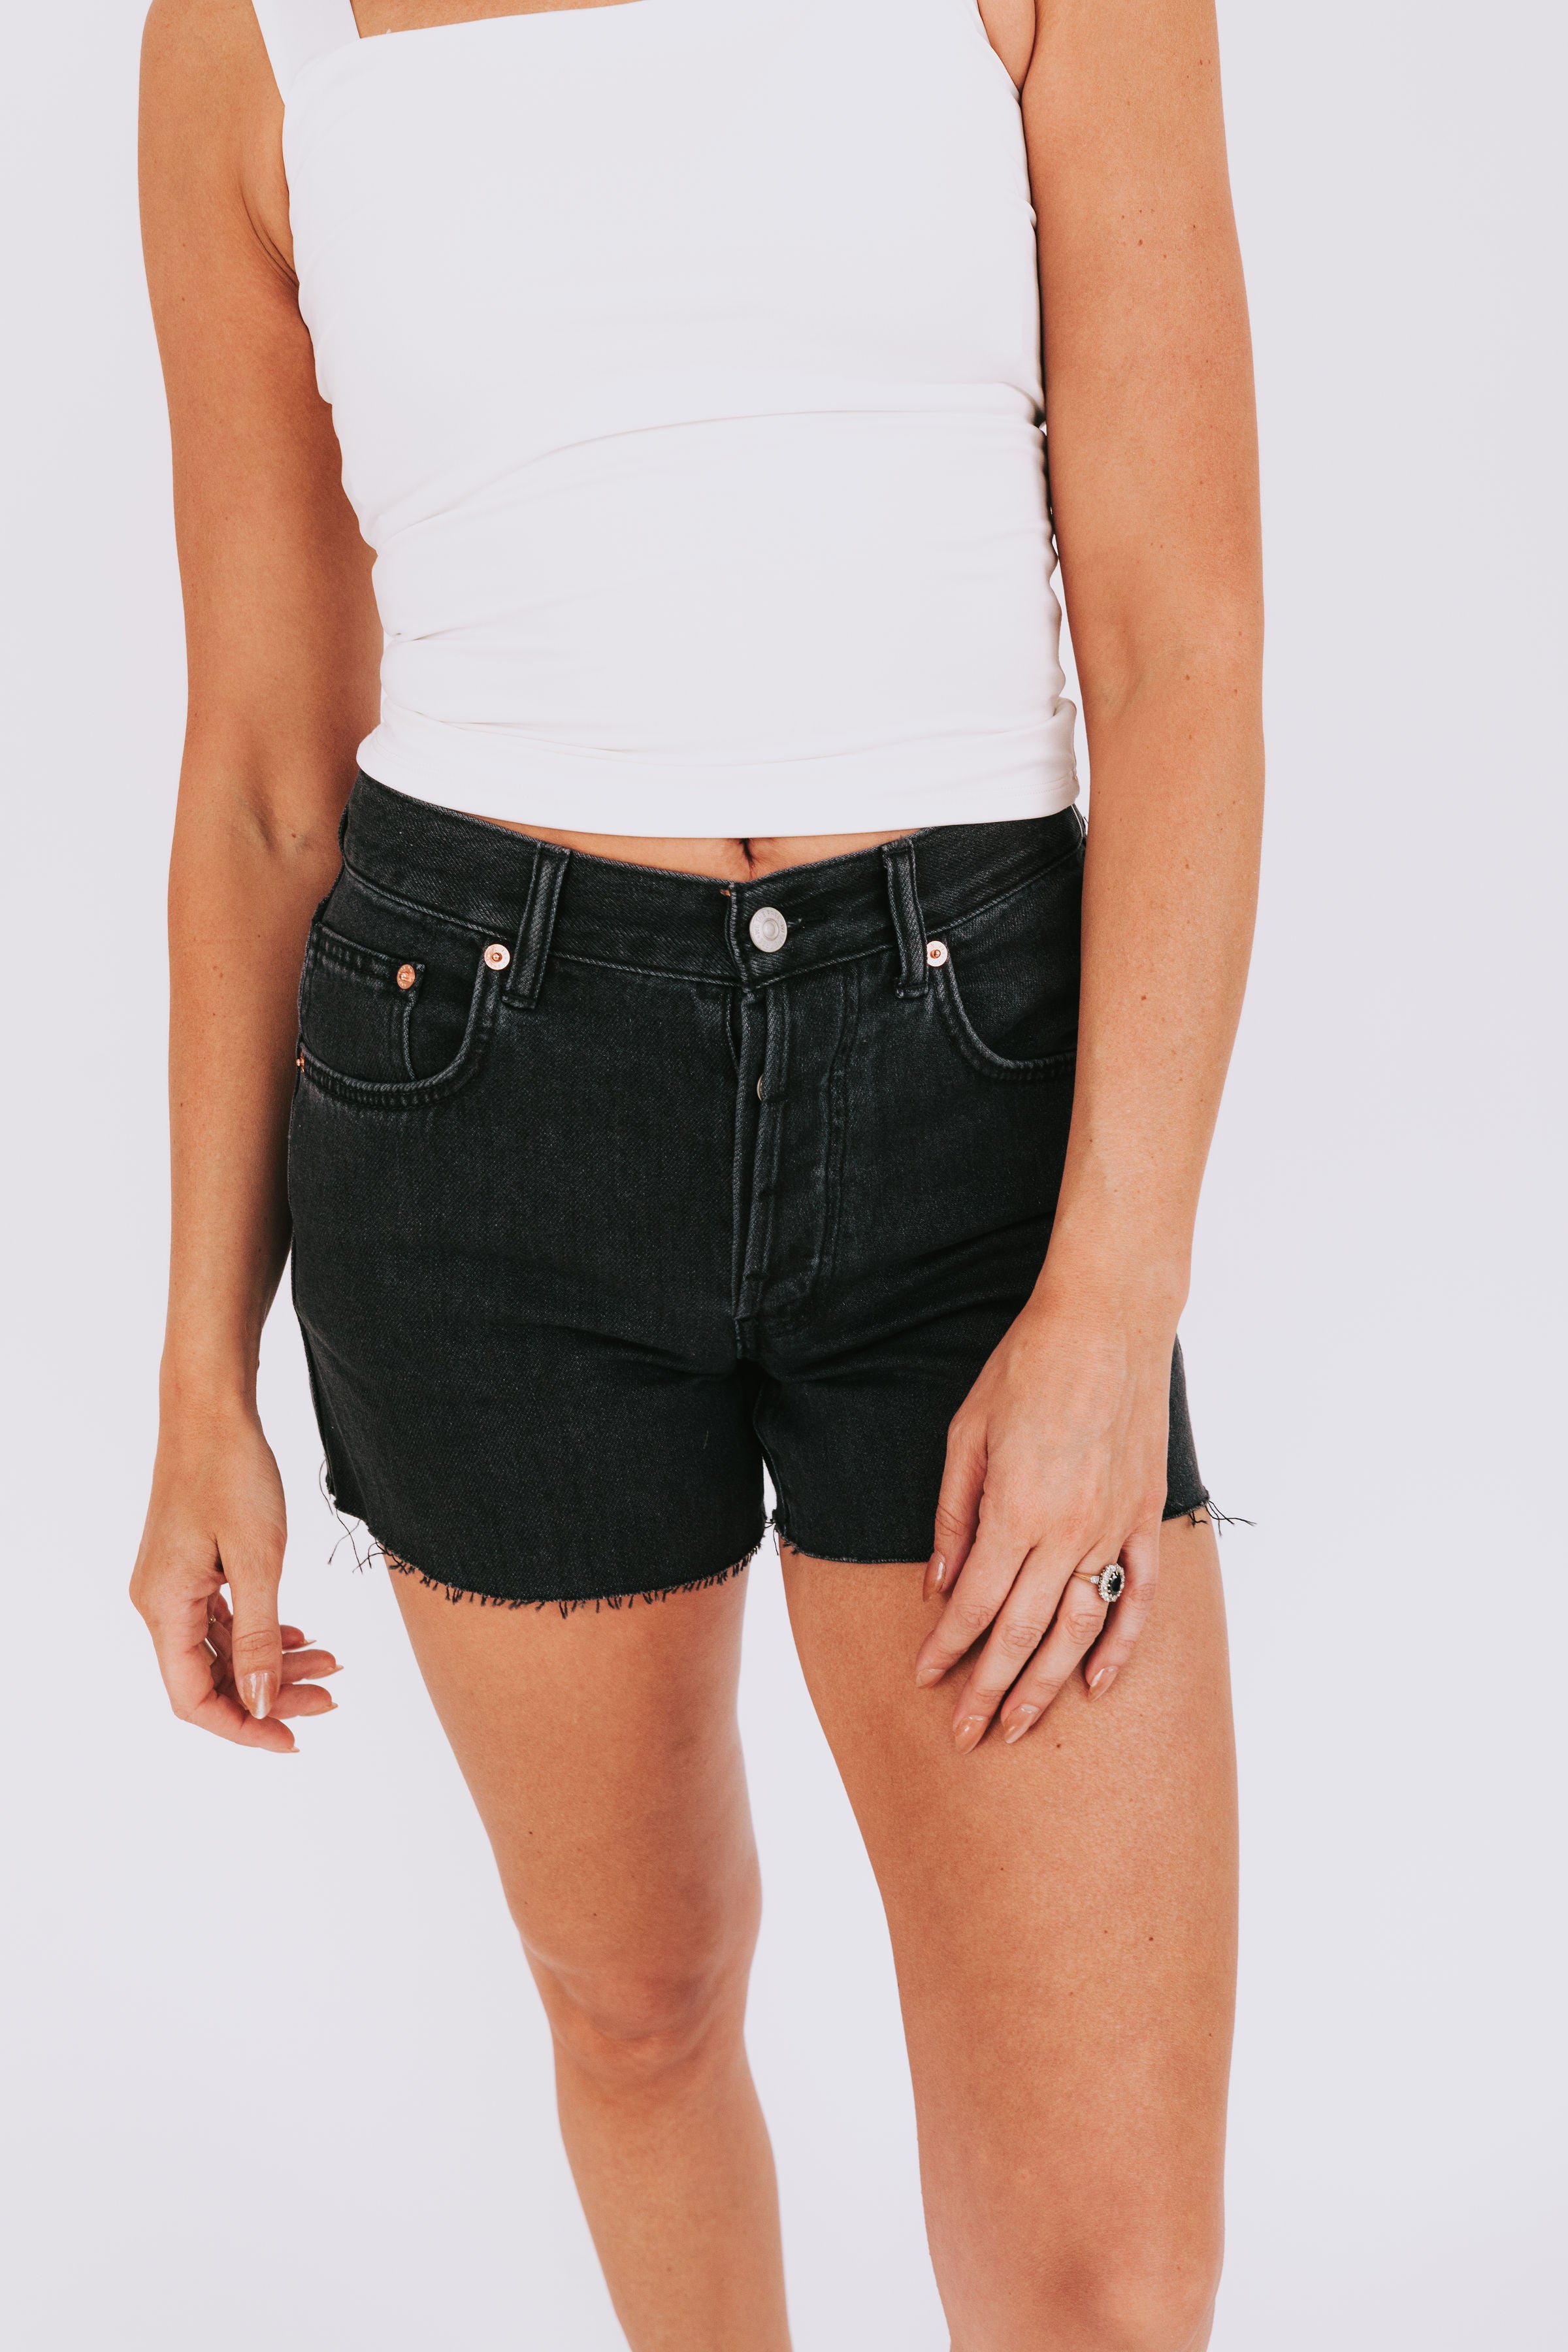 FREE PEOPLE - Ivy Mid-Rise Shorts